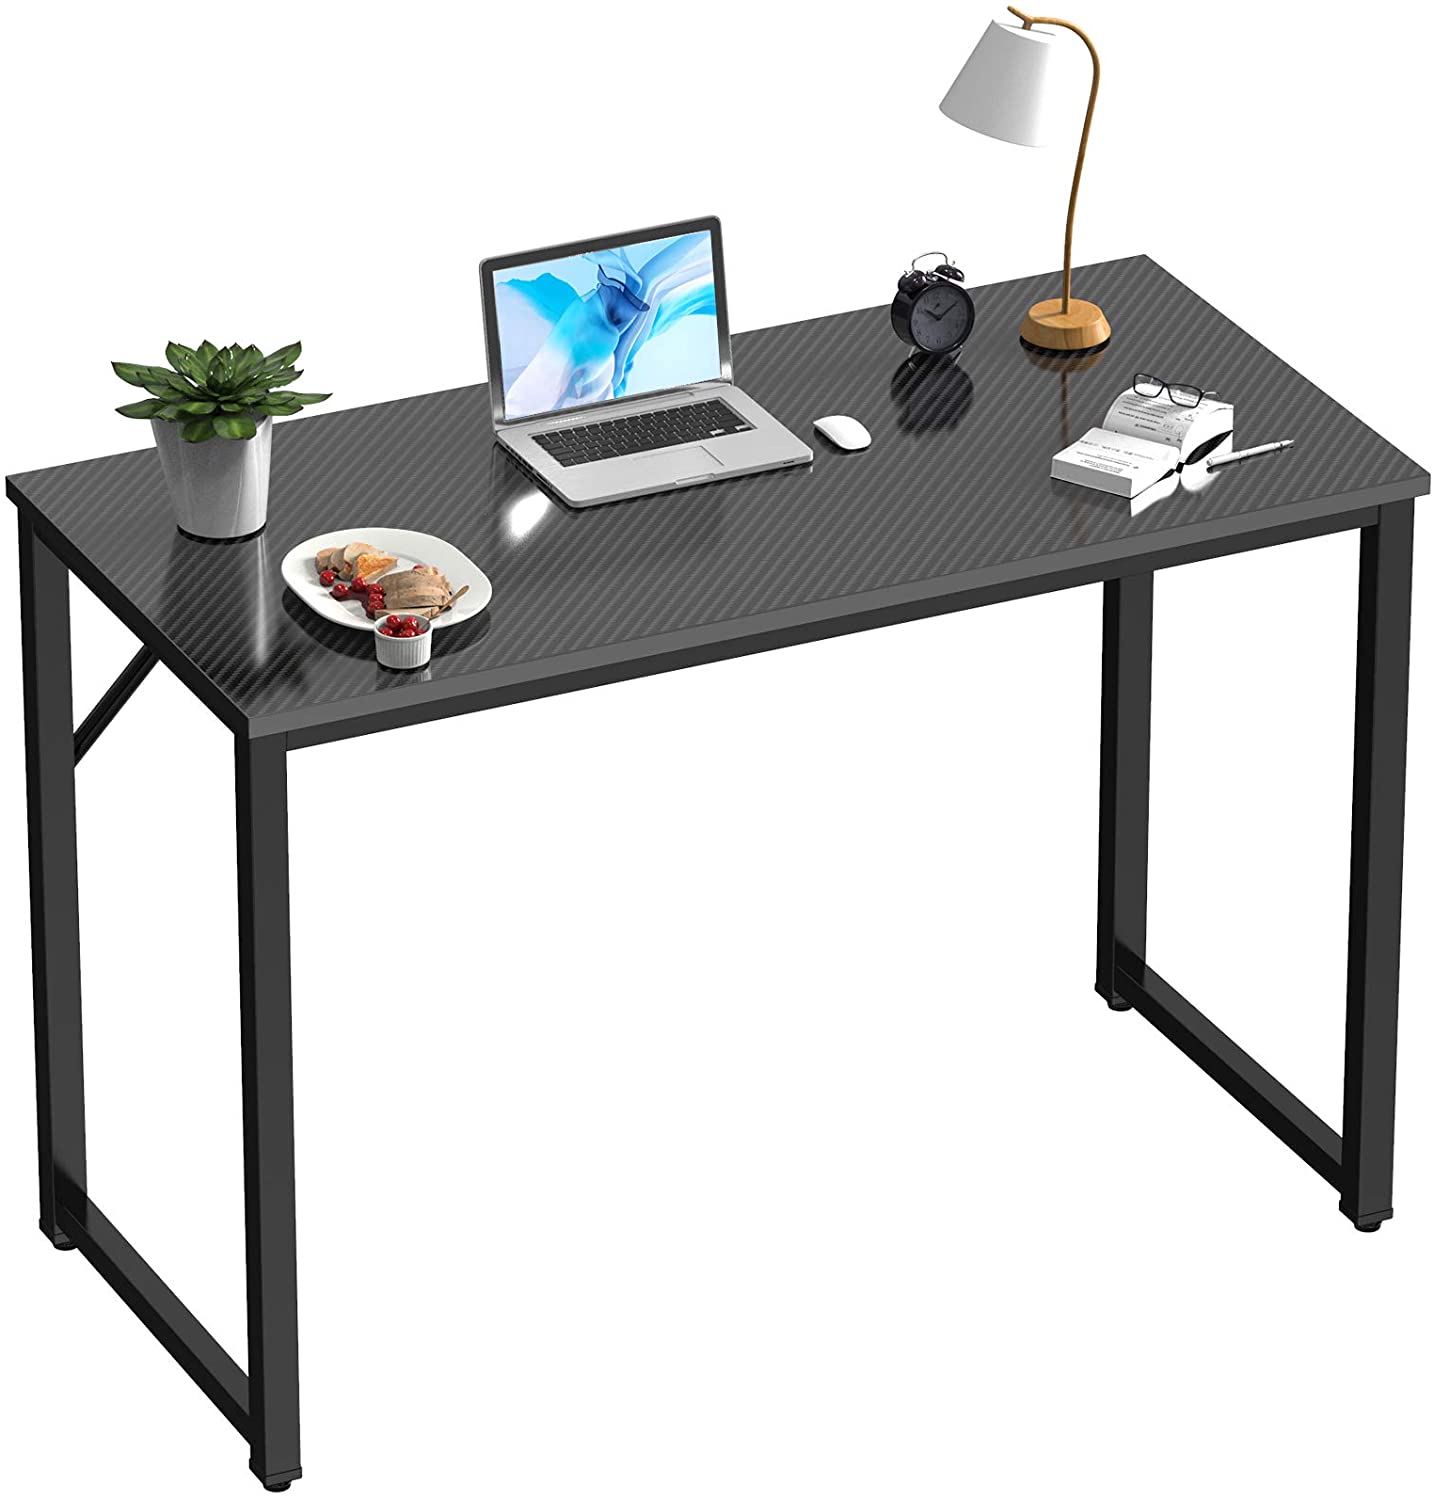 Study Table Modern Simple Style PC Desk, Black Metal Frame Small Place